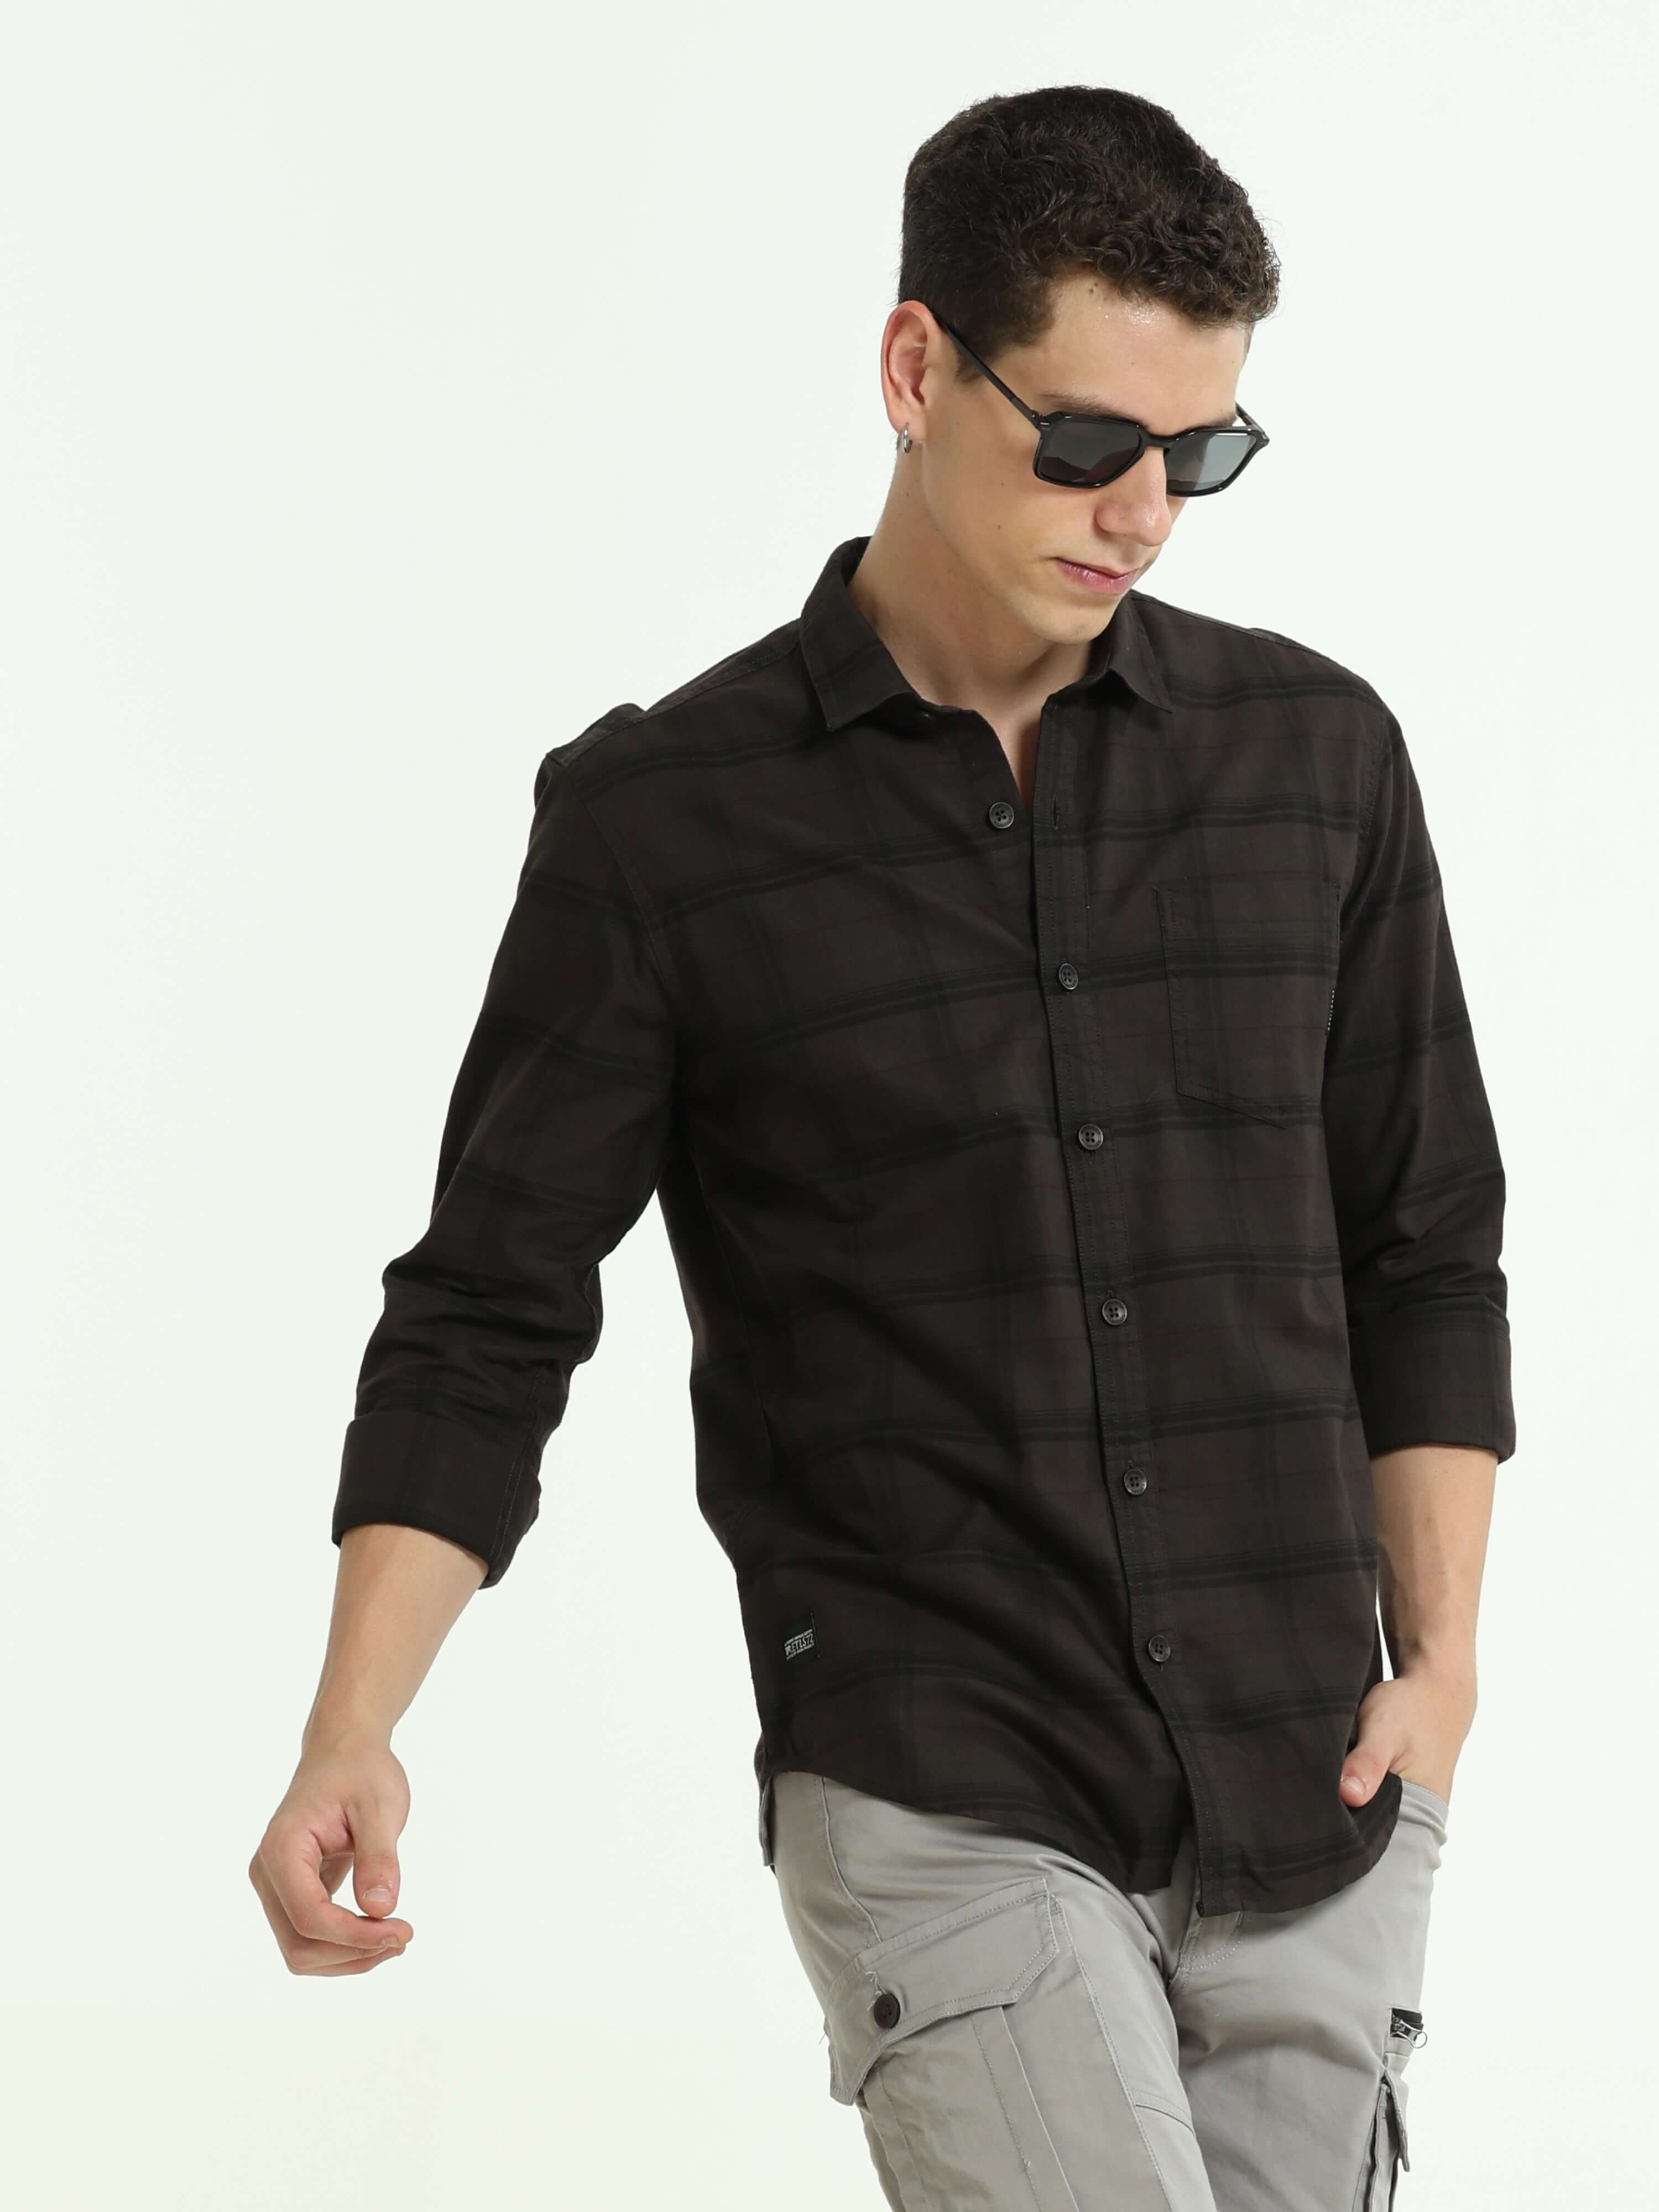 Sage brown casual check shirt shop online at Estilocus. 100% Cotton • Full-sleeve check shirt• self fold placket • Regular collar• Double button edge cuff • pocketless • Curved bottom hemline• Finest quality brand embroidery at front placket. • All sinlge